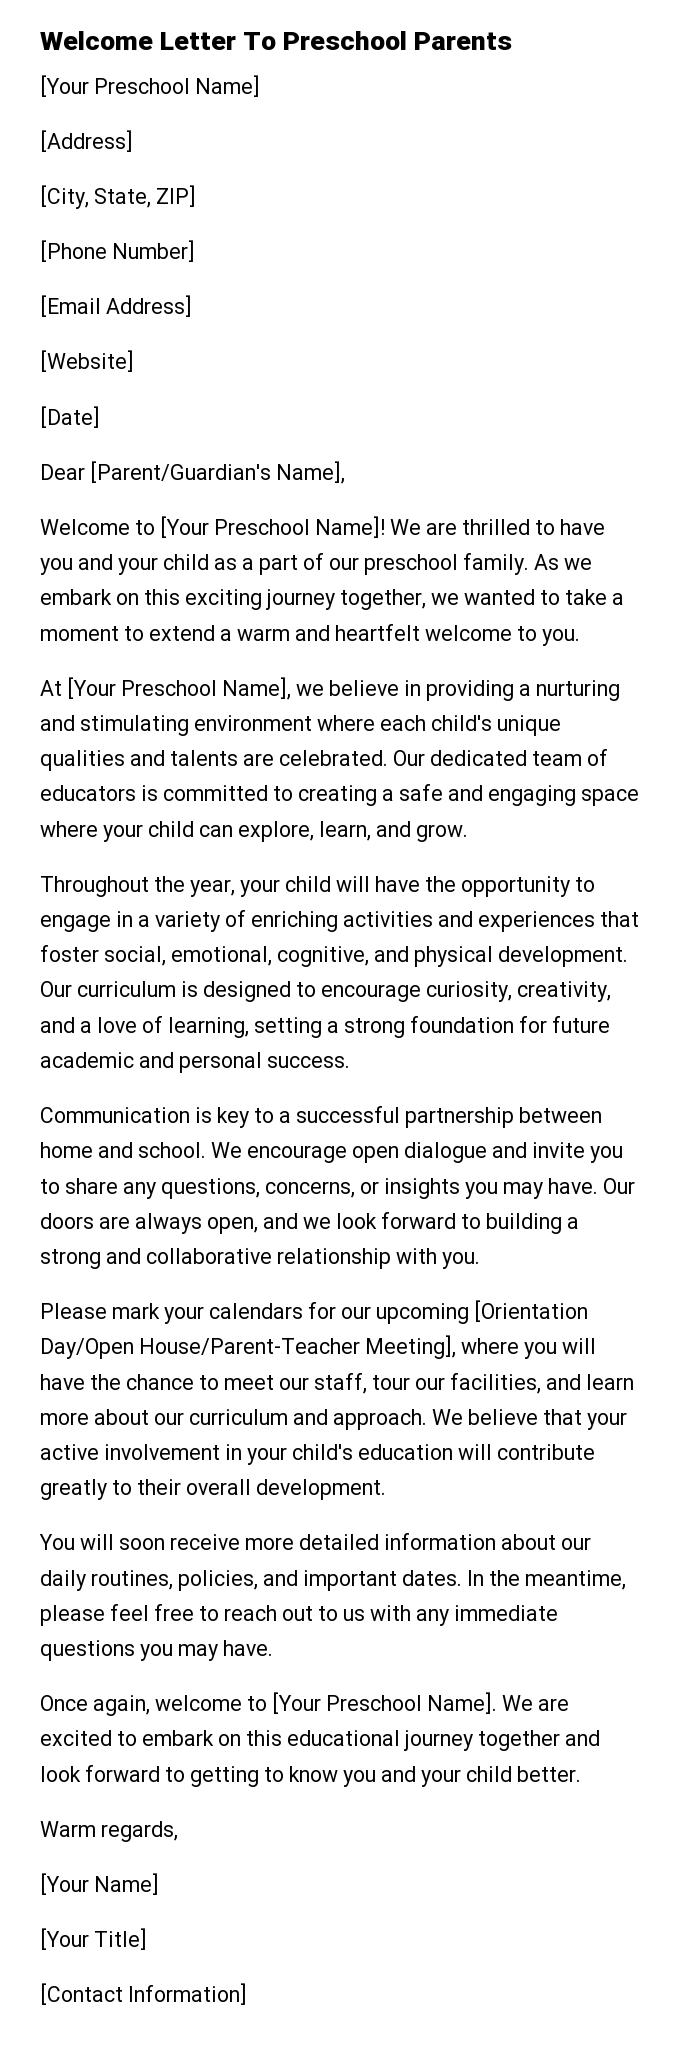 Welcome Letter To Preschool Parents